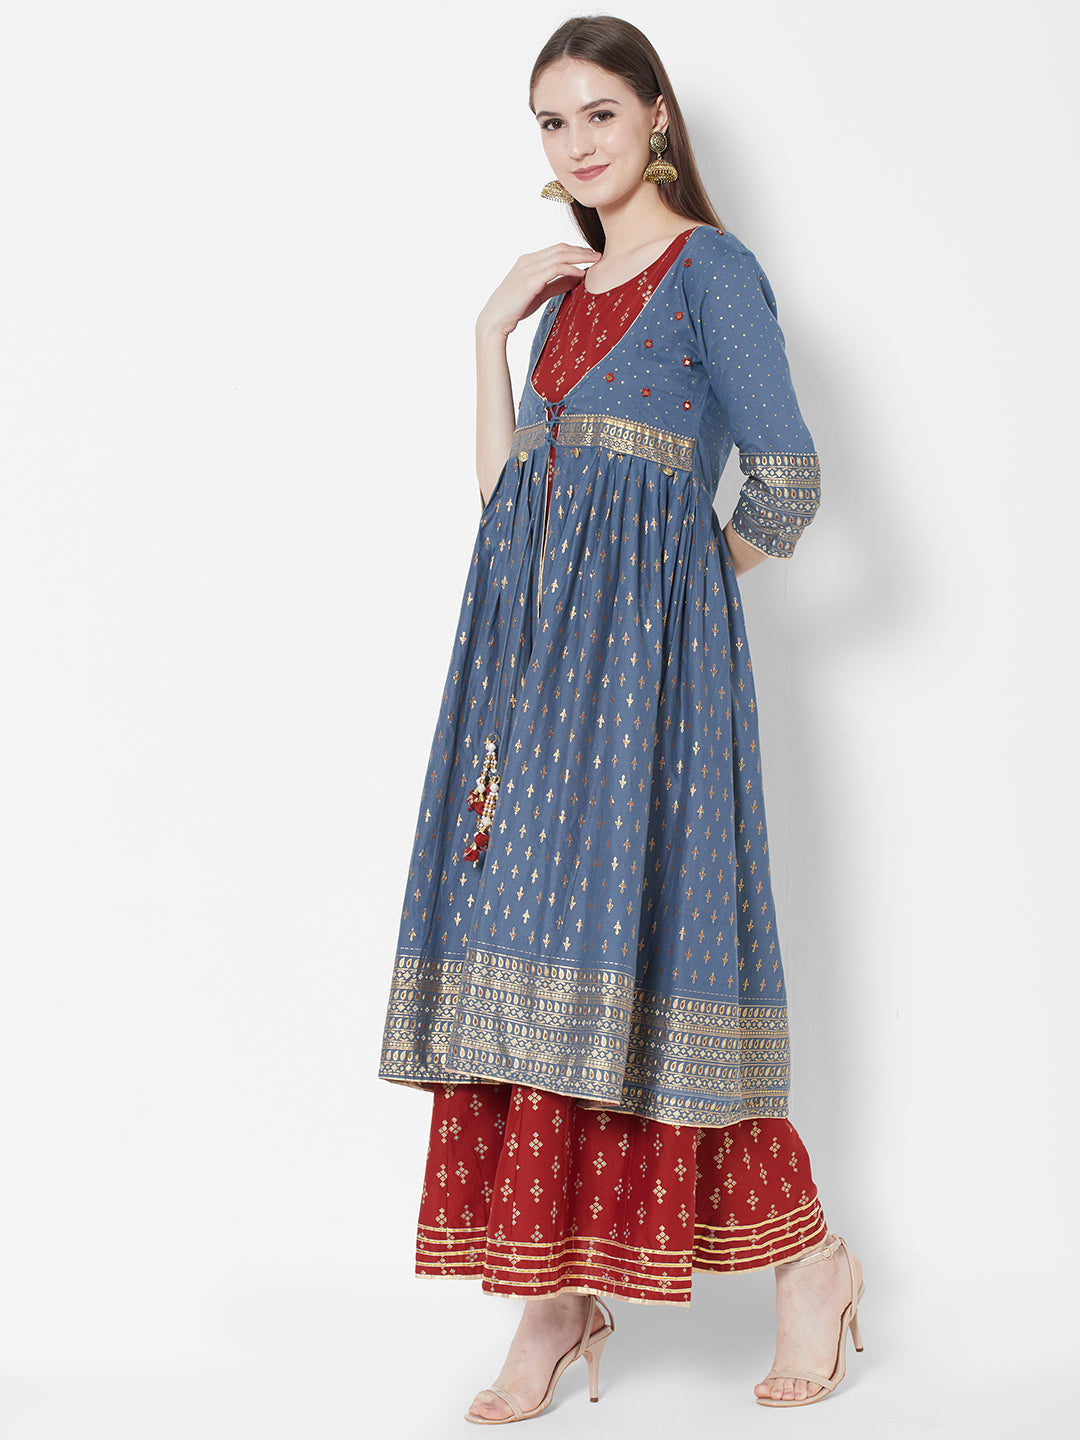 Vedic Ethnic Motifs Printed Fit  Flare Cotton Maxi Ethnic Dress with Jacket